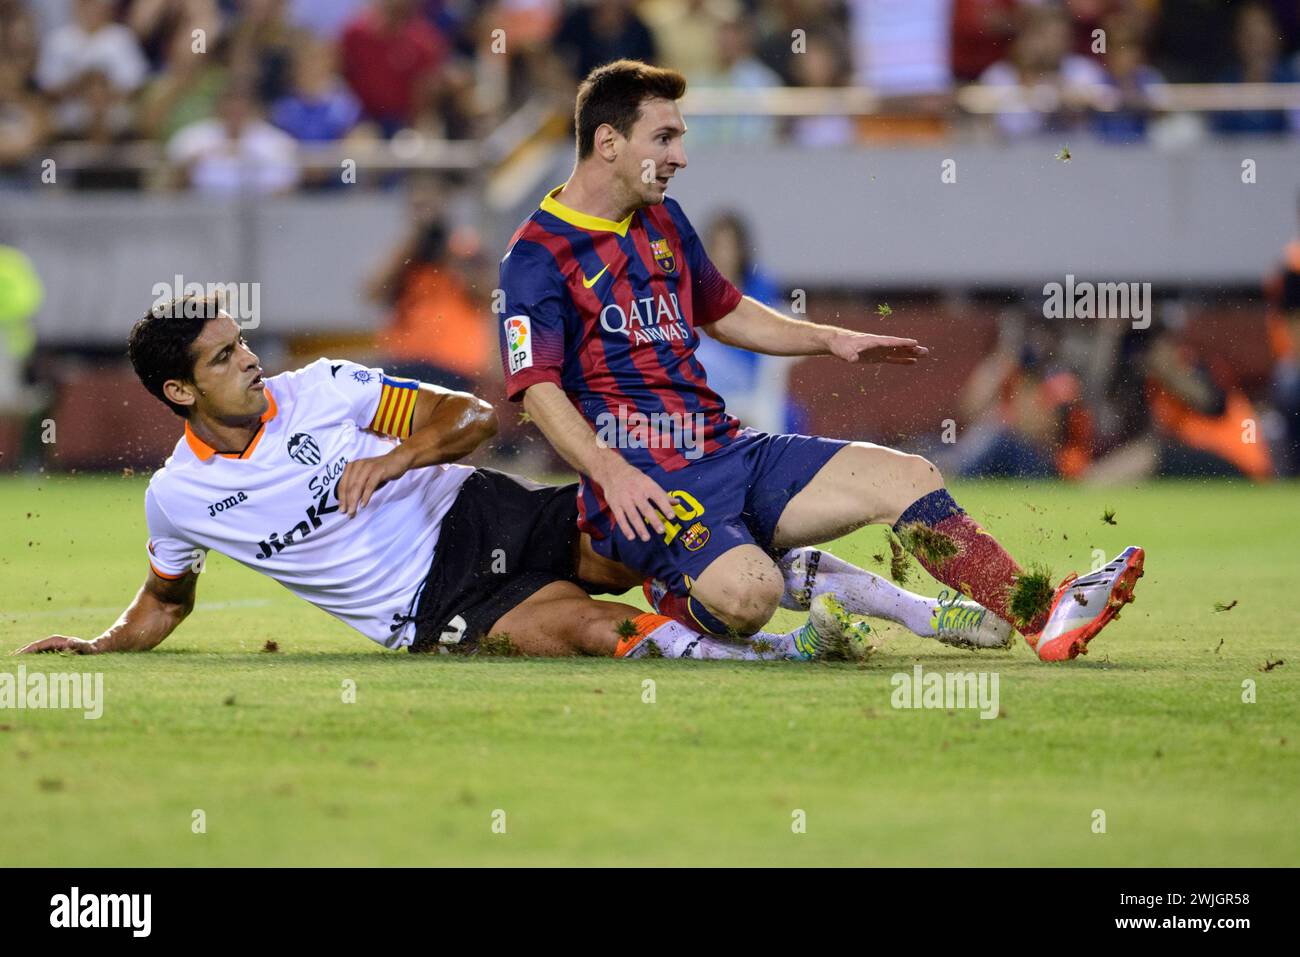 Futbol Club Barcelona's Leo Messi in action on the ground after a hard tackle by Valencia CF's Portuguese defender Rui Costa, Valencia, Spain. Stock Photo